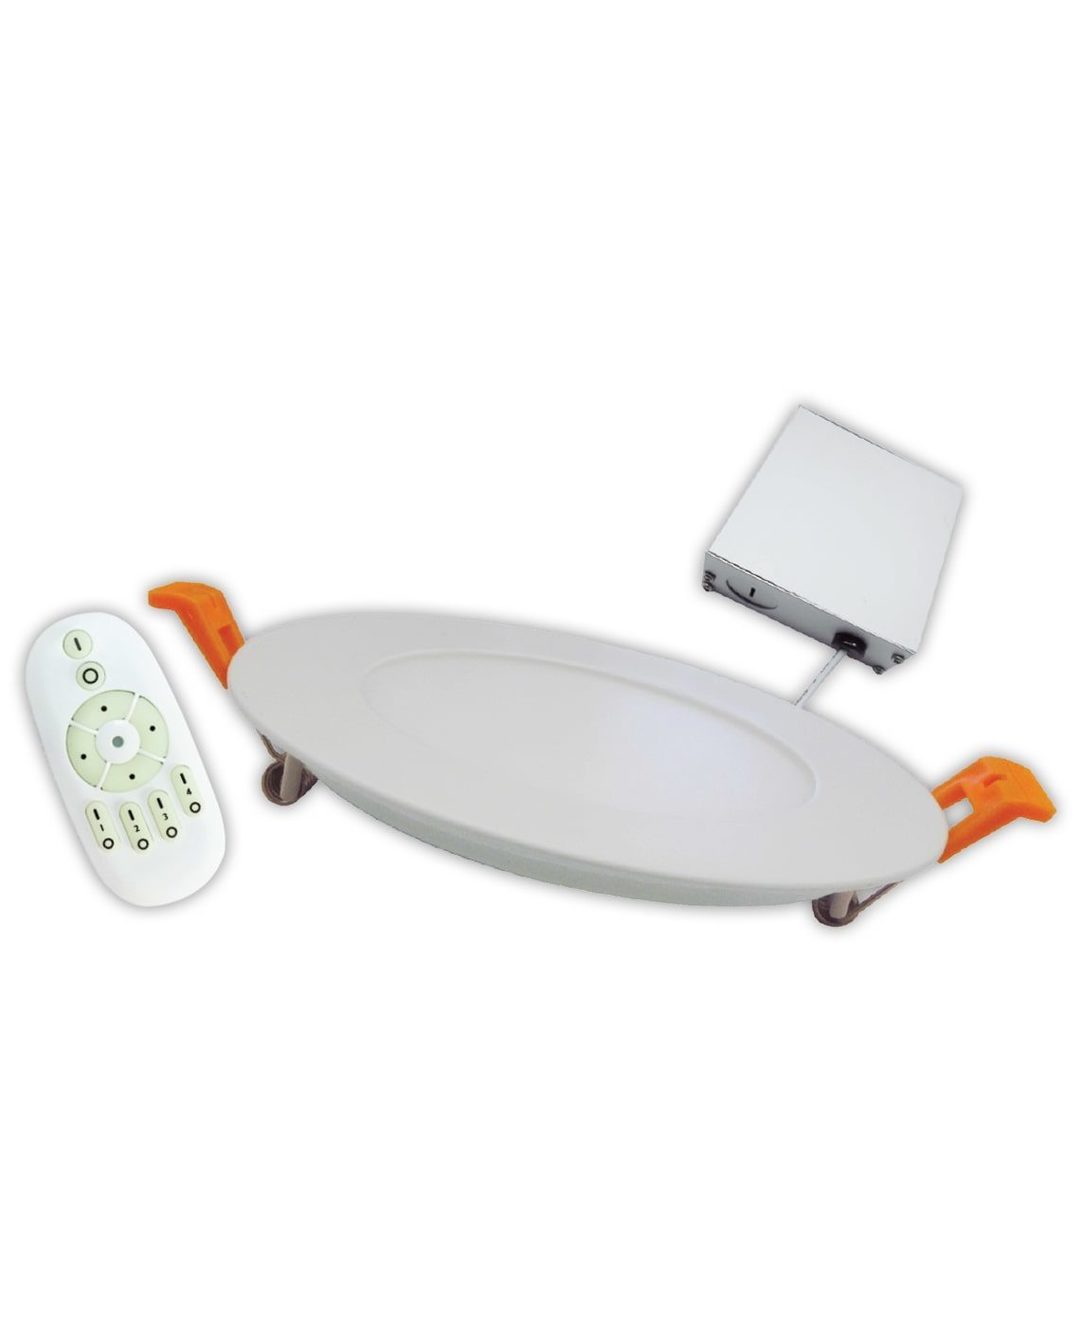 LED 4" Dimming and 3 CCT Adjustable Slim Panel with Remote Control